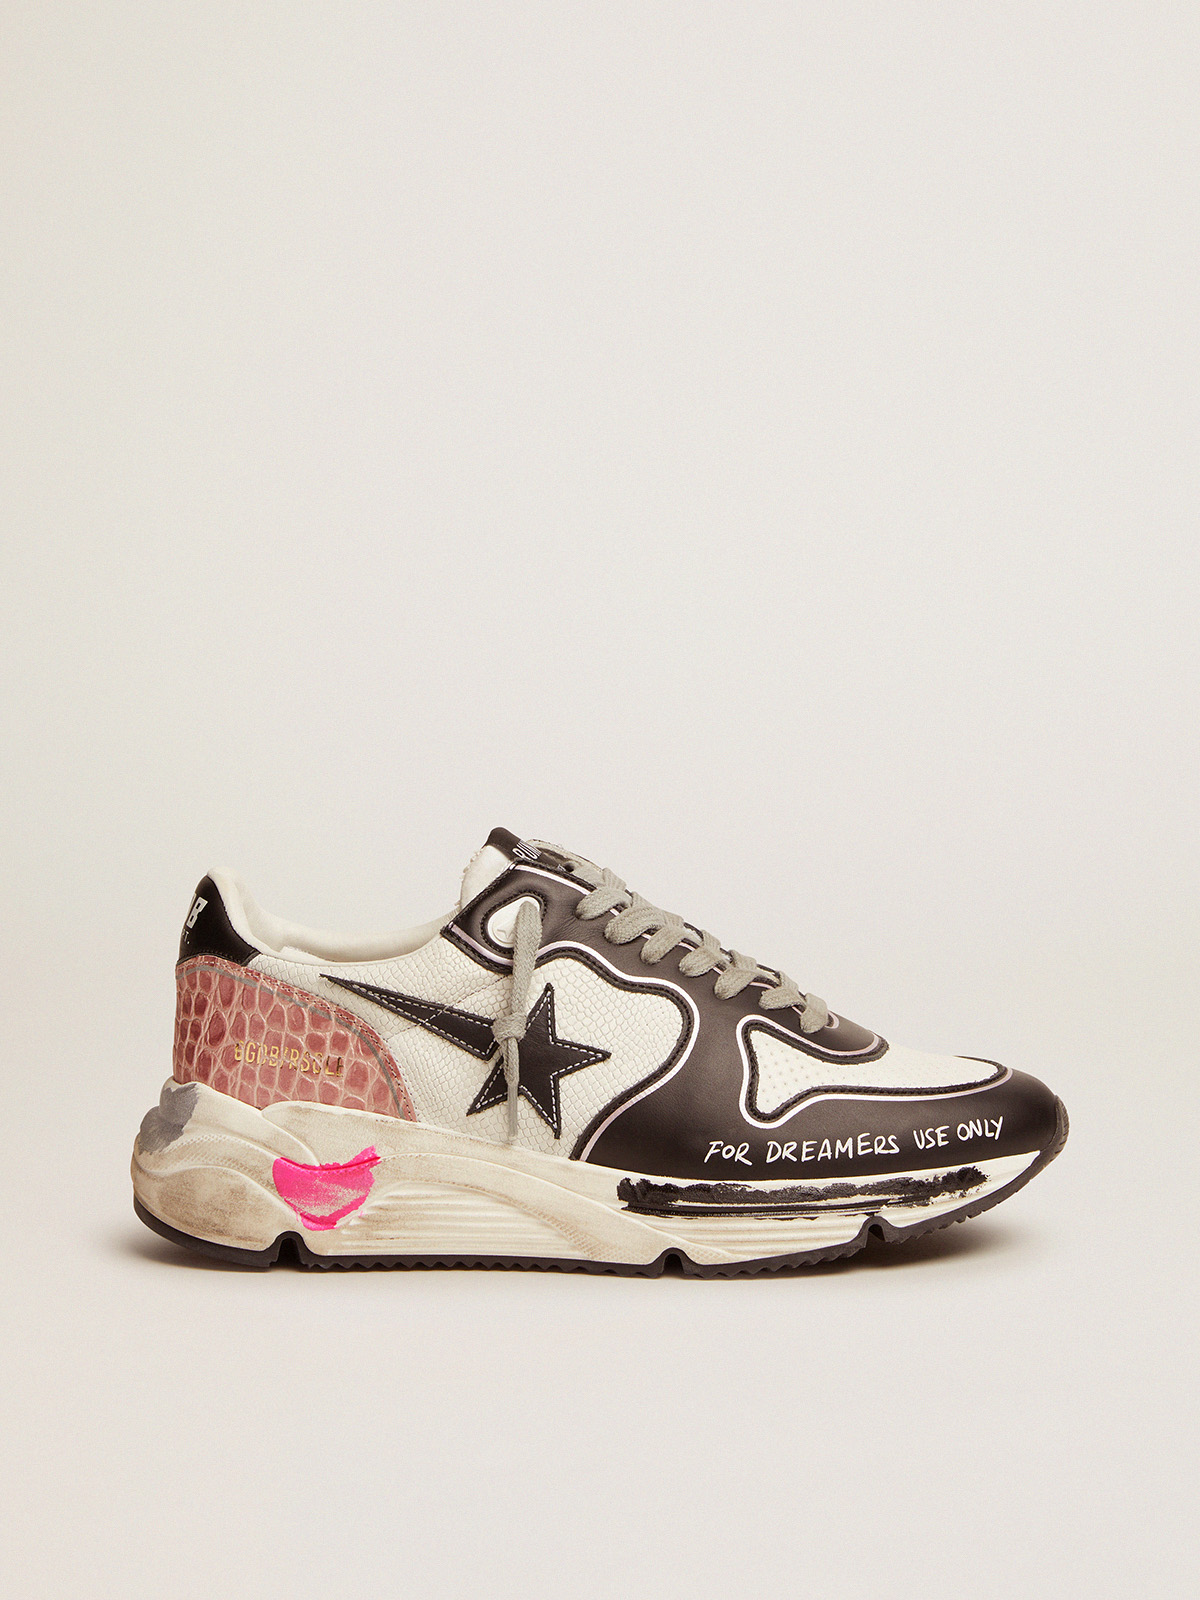 Running Sole sneakers in white snake-print leather with contrasting black  details | Golden Goose